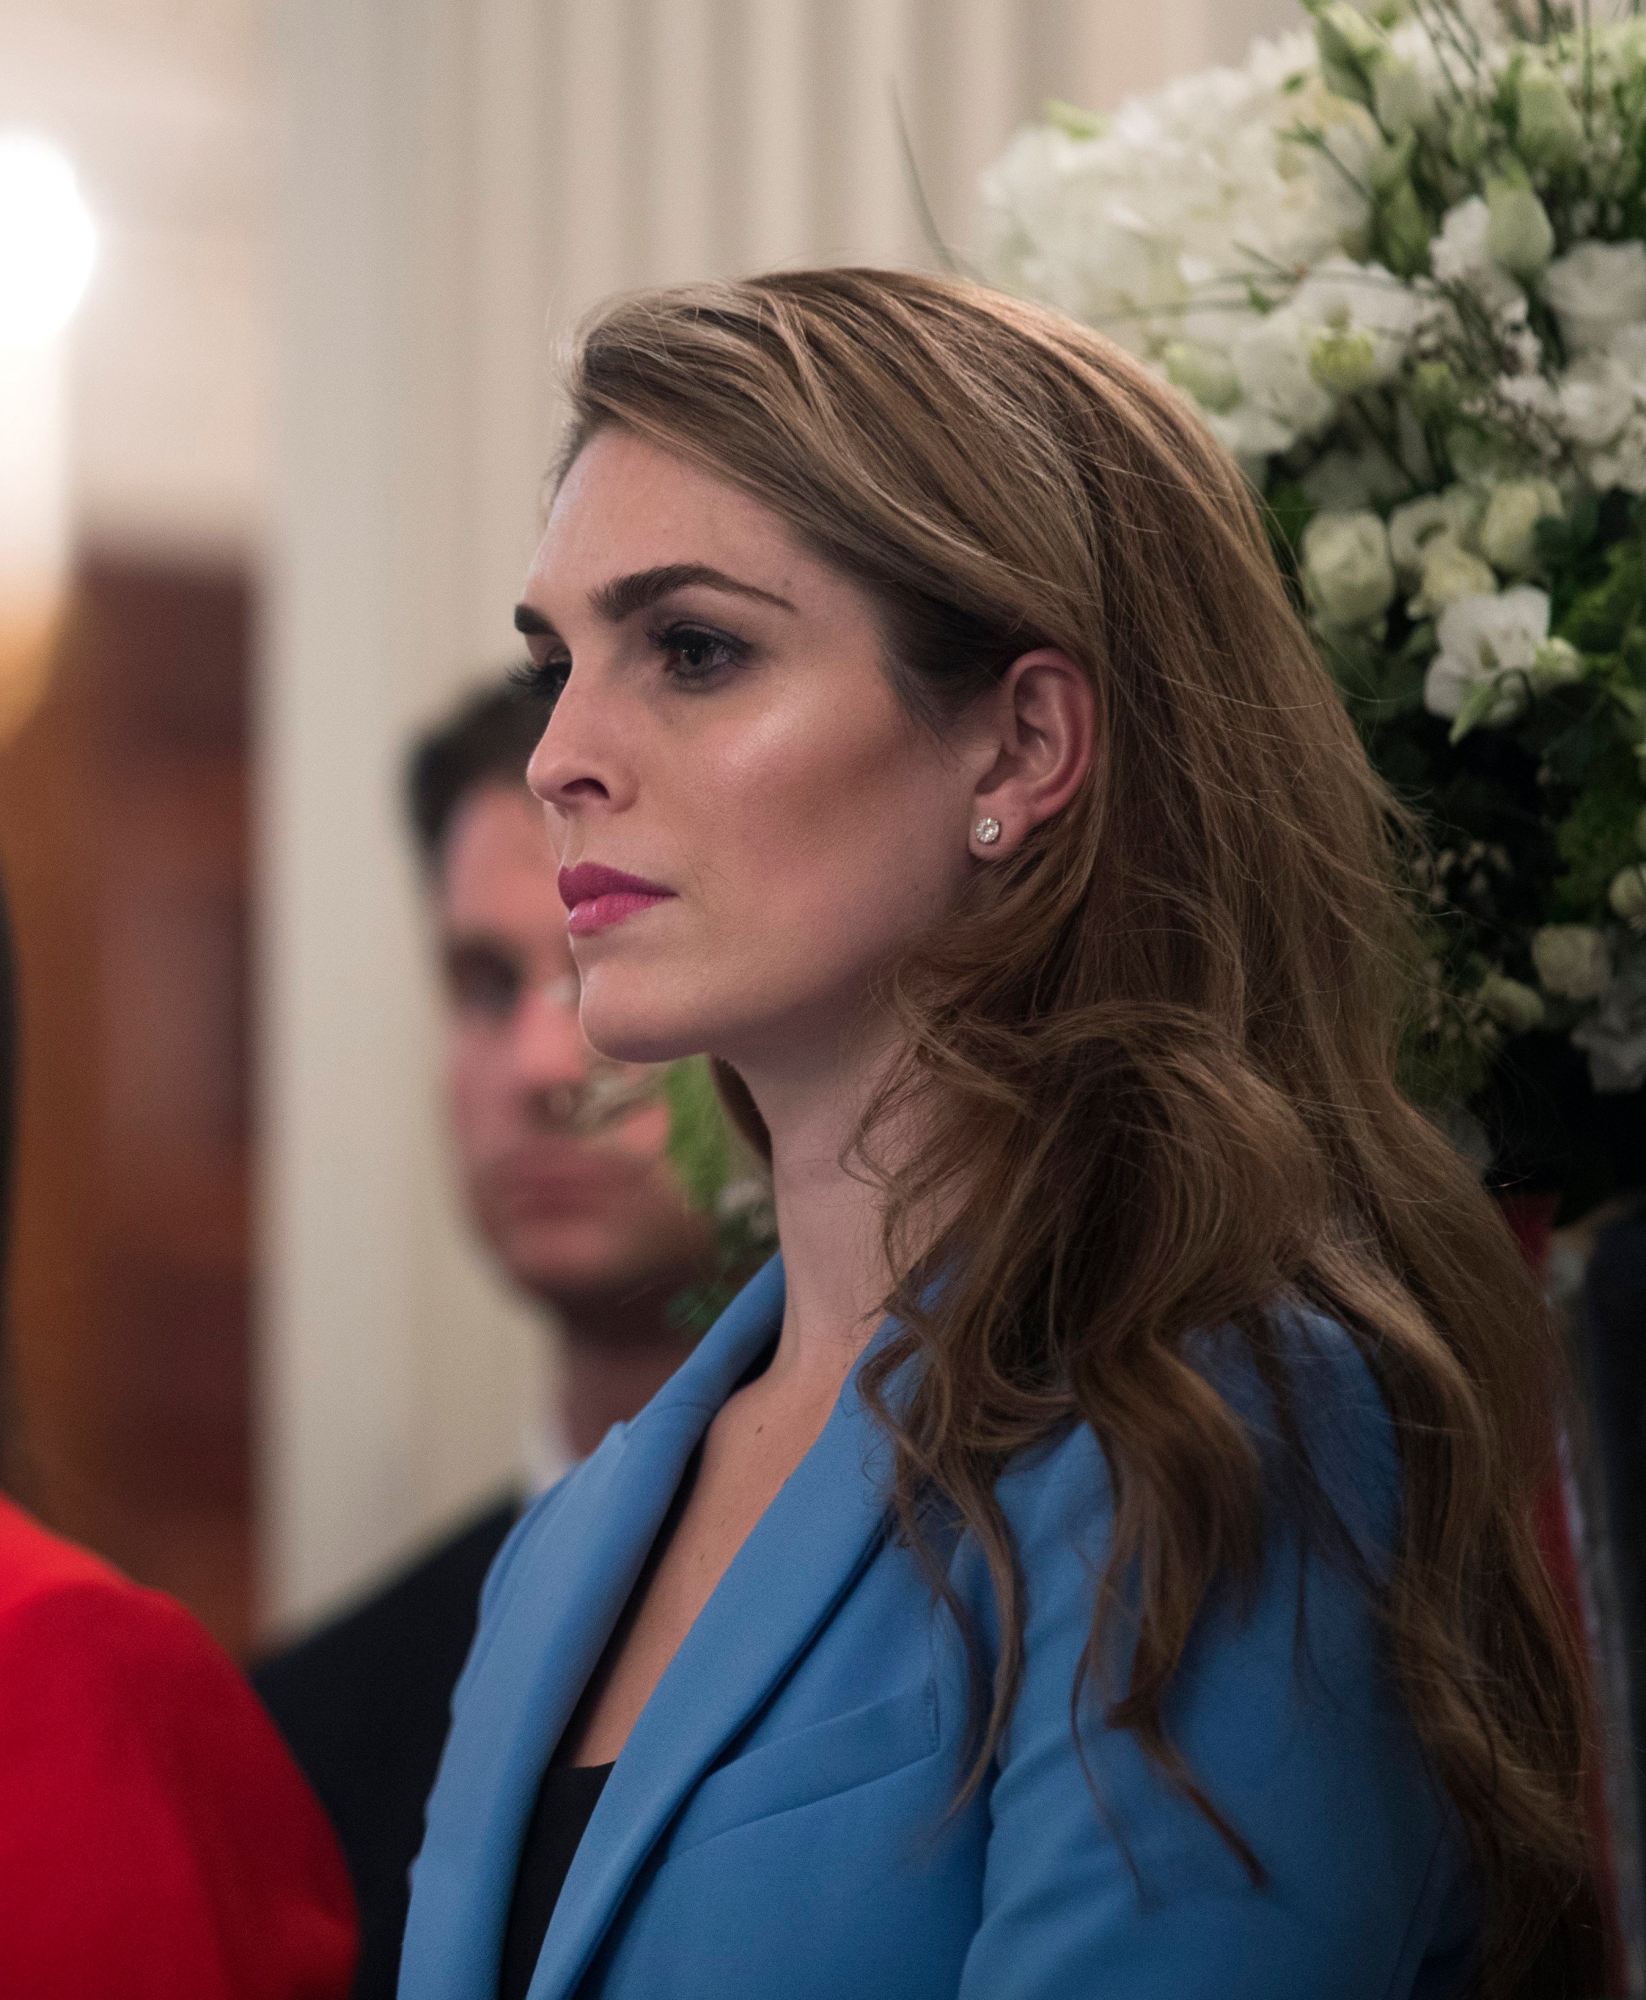 epa06571489 (FILE) - White House Communications Director Hope Hicks (R) listens to remarks during a listening session hosted by US President Donald J. Trump with high school students and teachers in the State Dining Room of the White House in Washington, DC, USA, 21 February 2018 (issued 28 February 2018). A day after testifying in the Russia probe, one of President Trump's advisers, Hope Hicks, said she plans to resign as White House Communications Director.  EPA/SHAWN THEW (FILE) USA HOPE HICKS